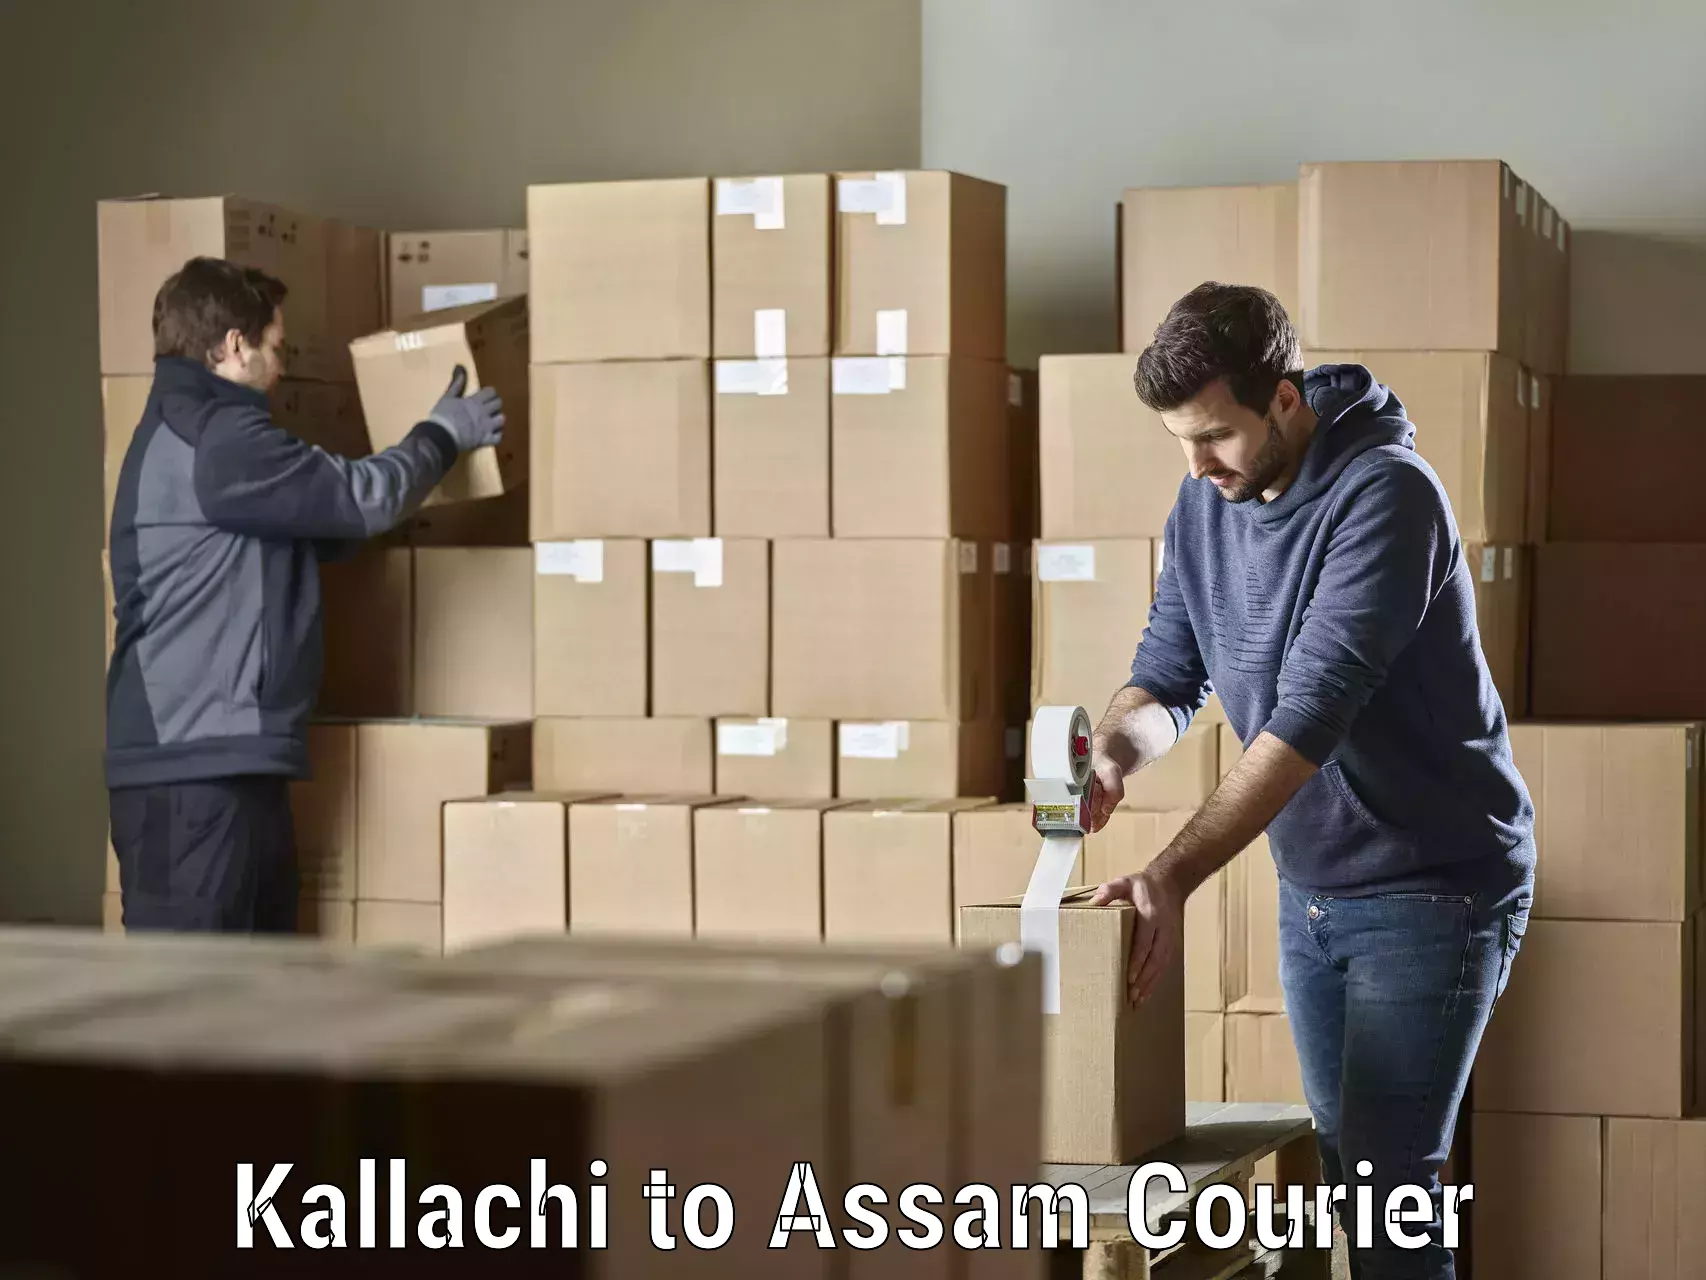 Full-service courier options Kallachi to Lala Assam